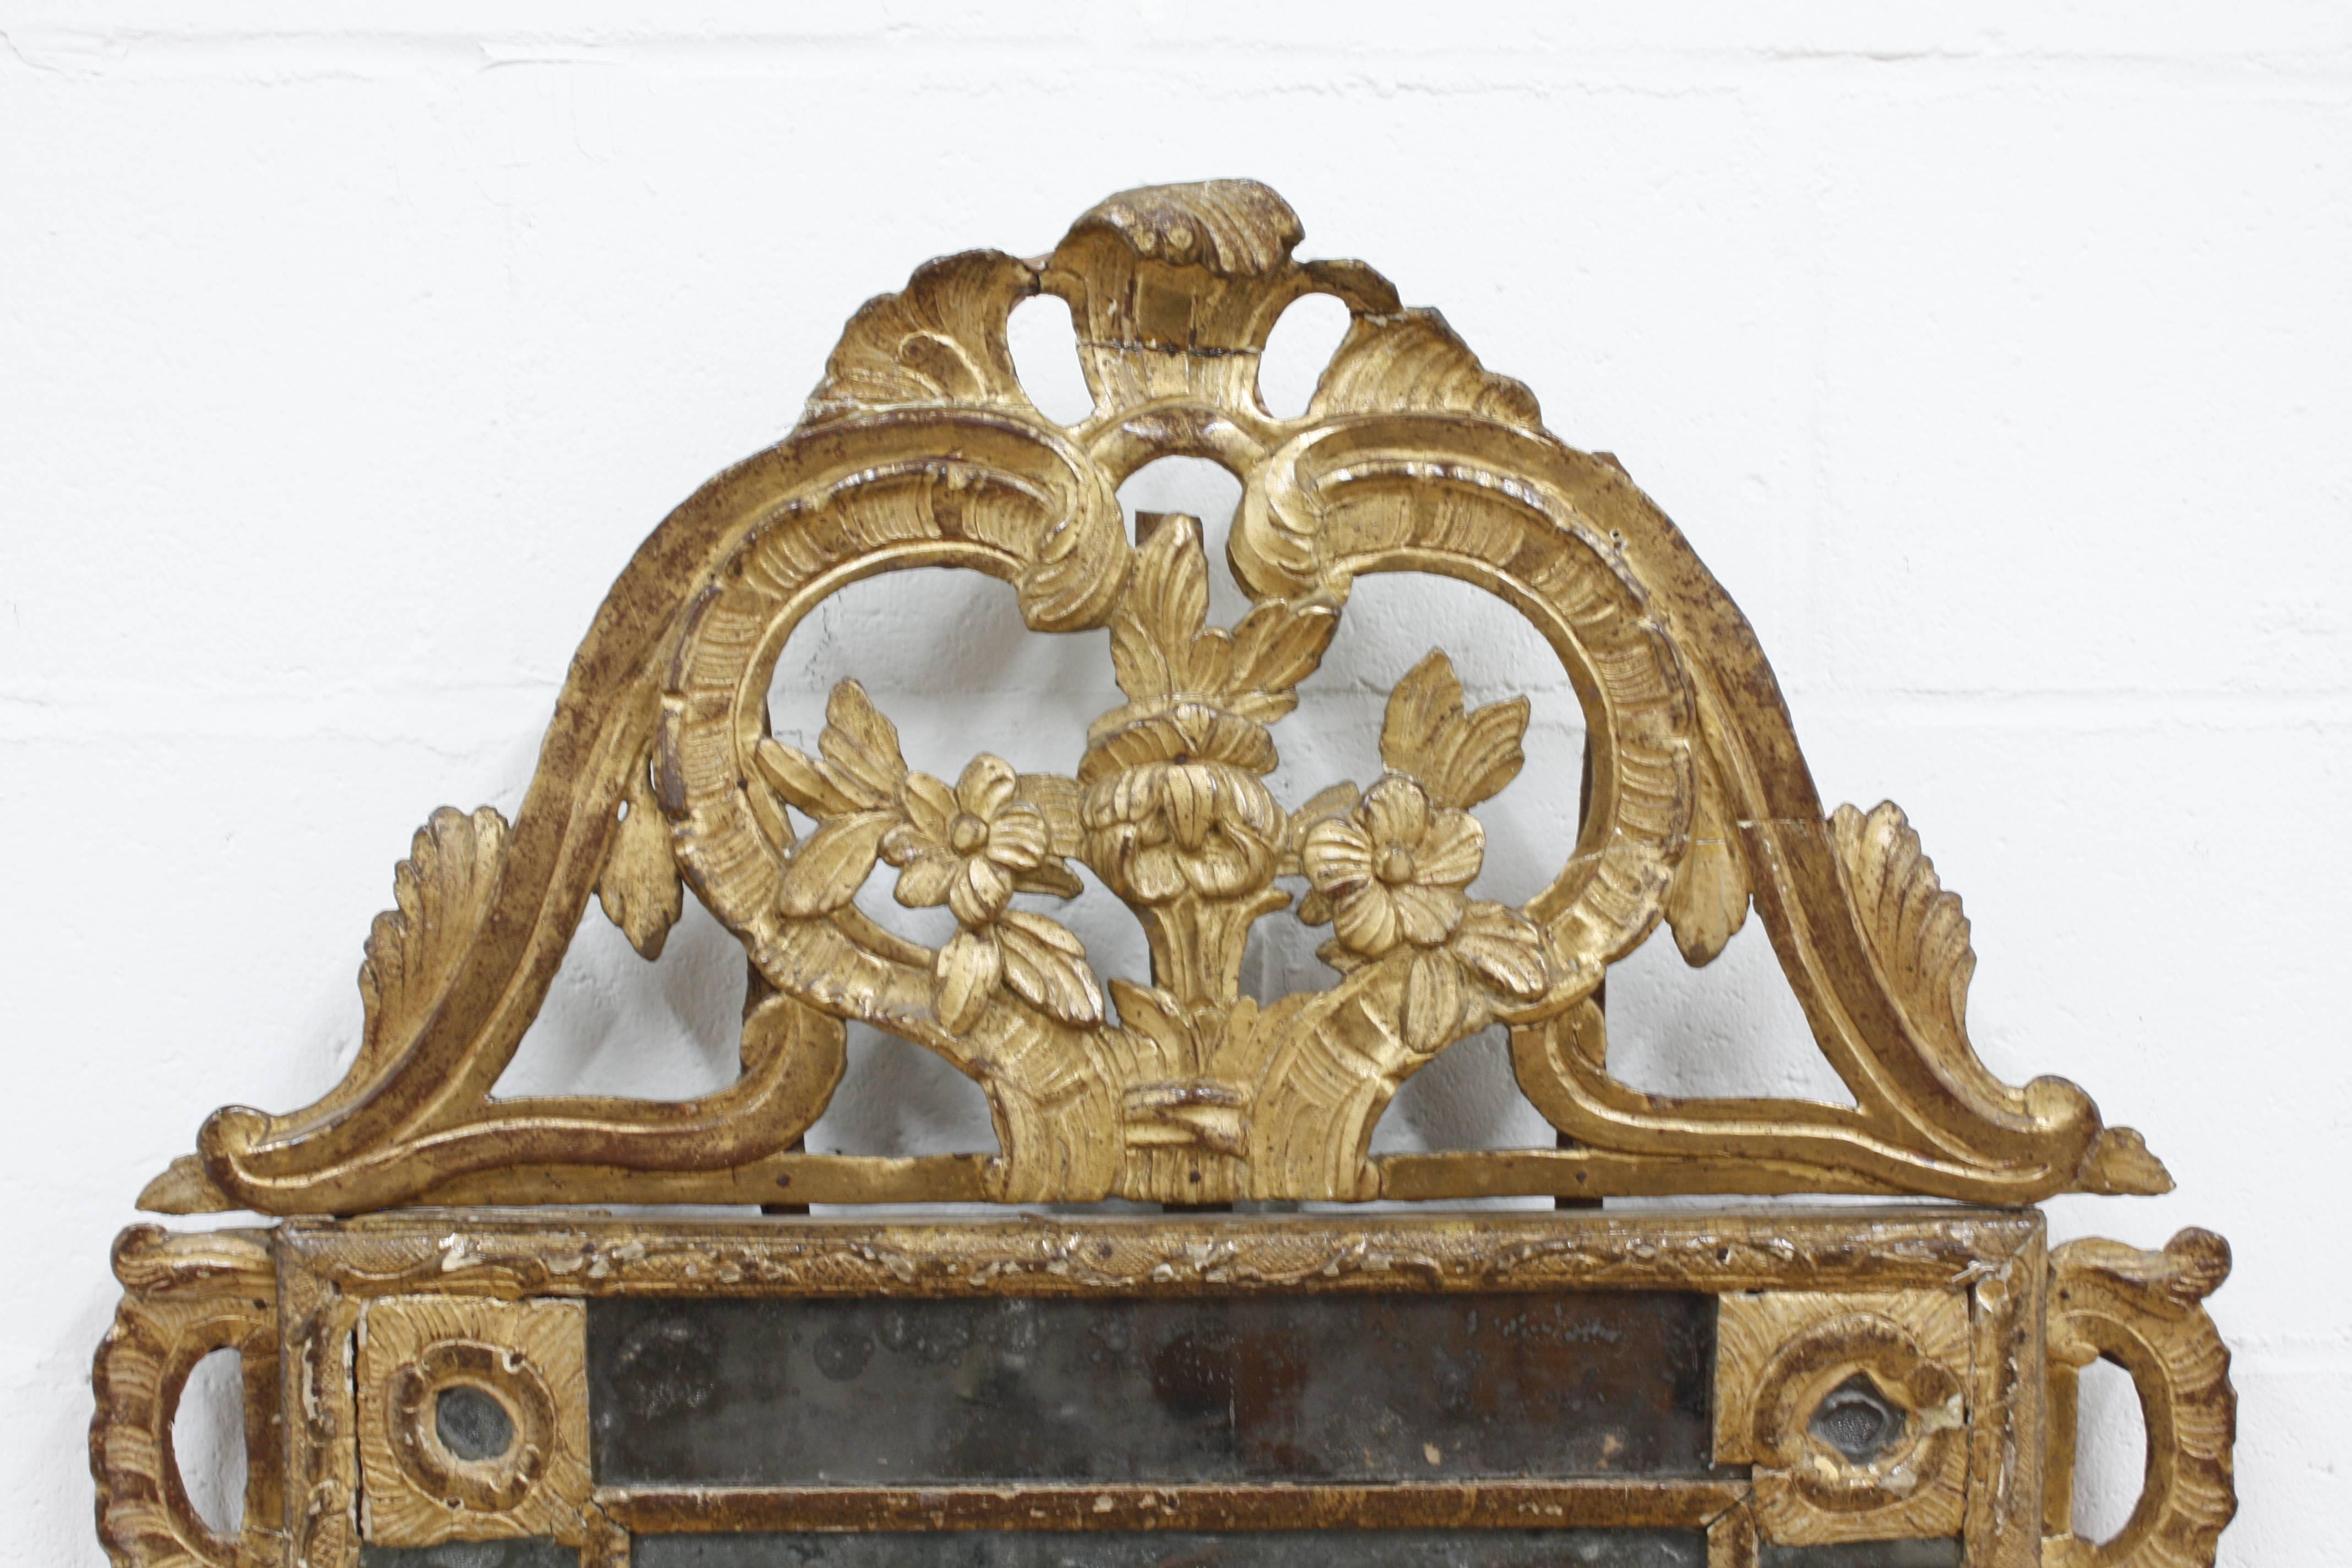 This 1790s French Louis XVI-style wall mirror features the original giltwood frame with ornate carvings. The frame features ornate carvings of flowers, acanthus leaves, ribbons, and decorative patterns. The original mirror is in fair condition with